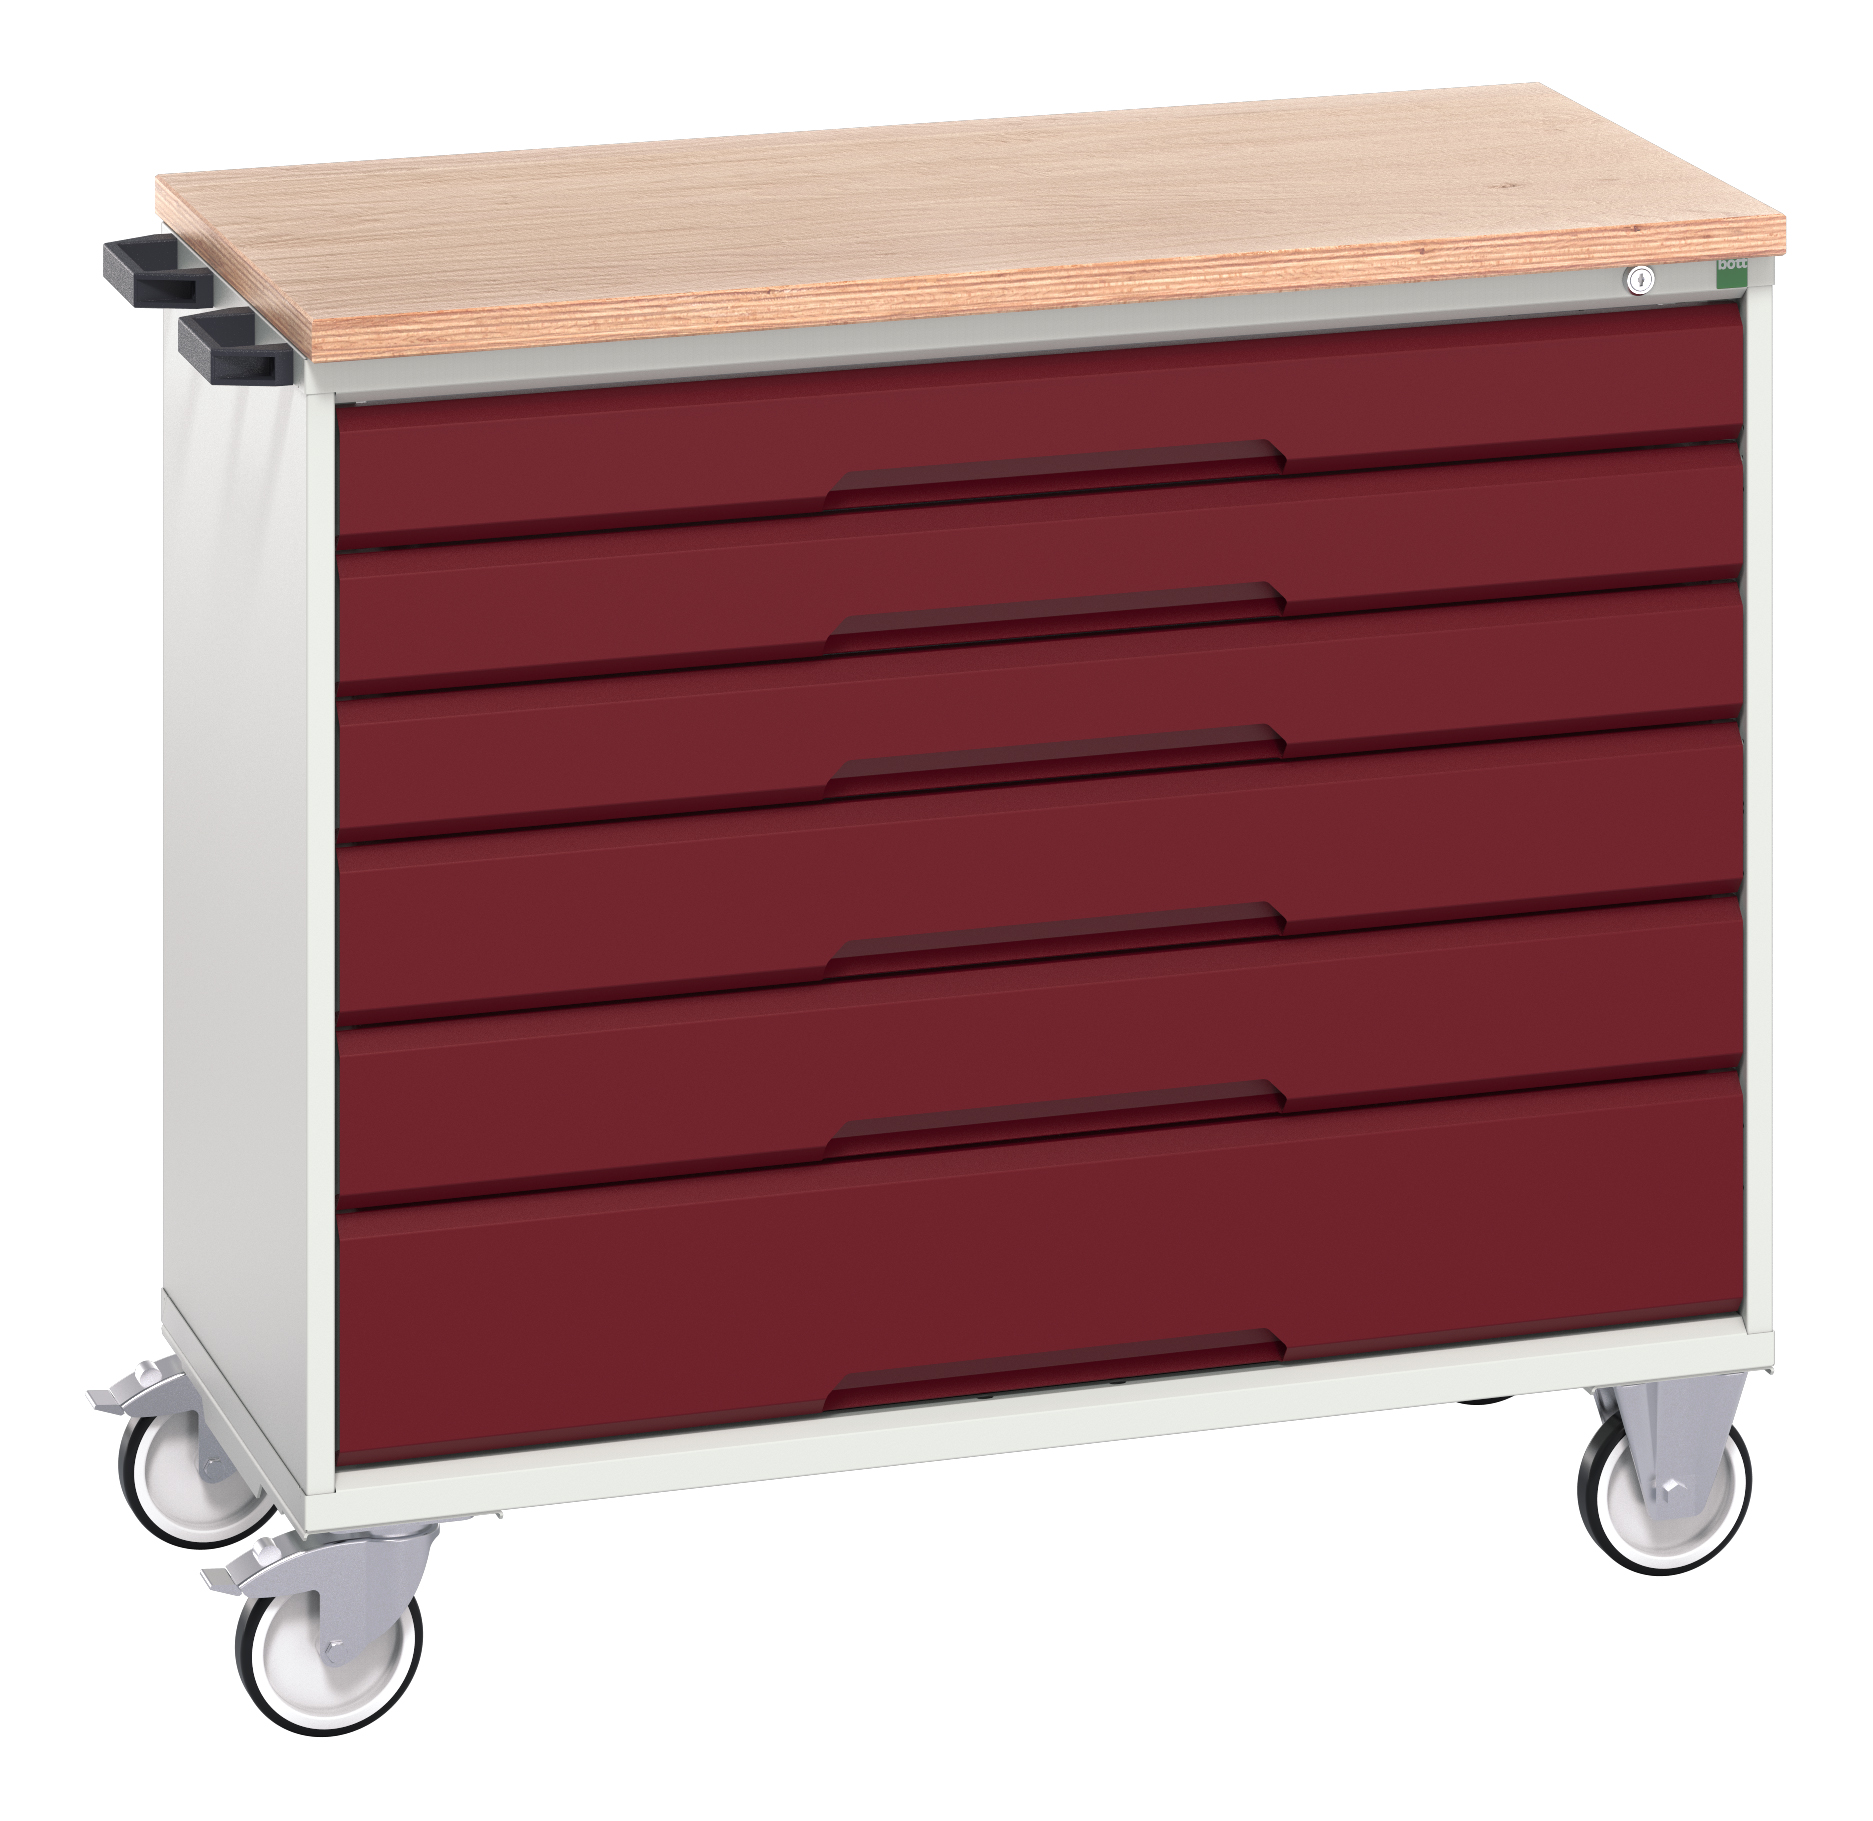 Bott Verso Mobile Drawer Cabinet With 6 Drawers & Multiplex Top - 16927054.24